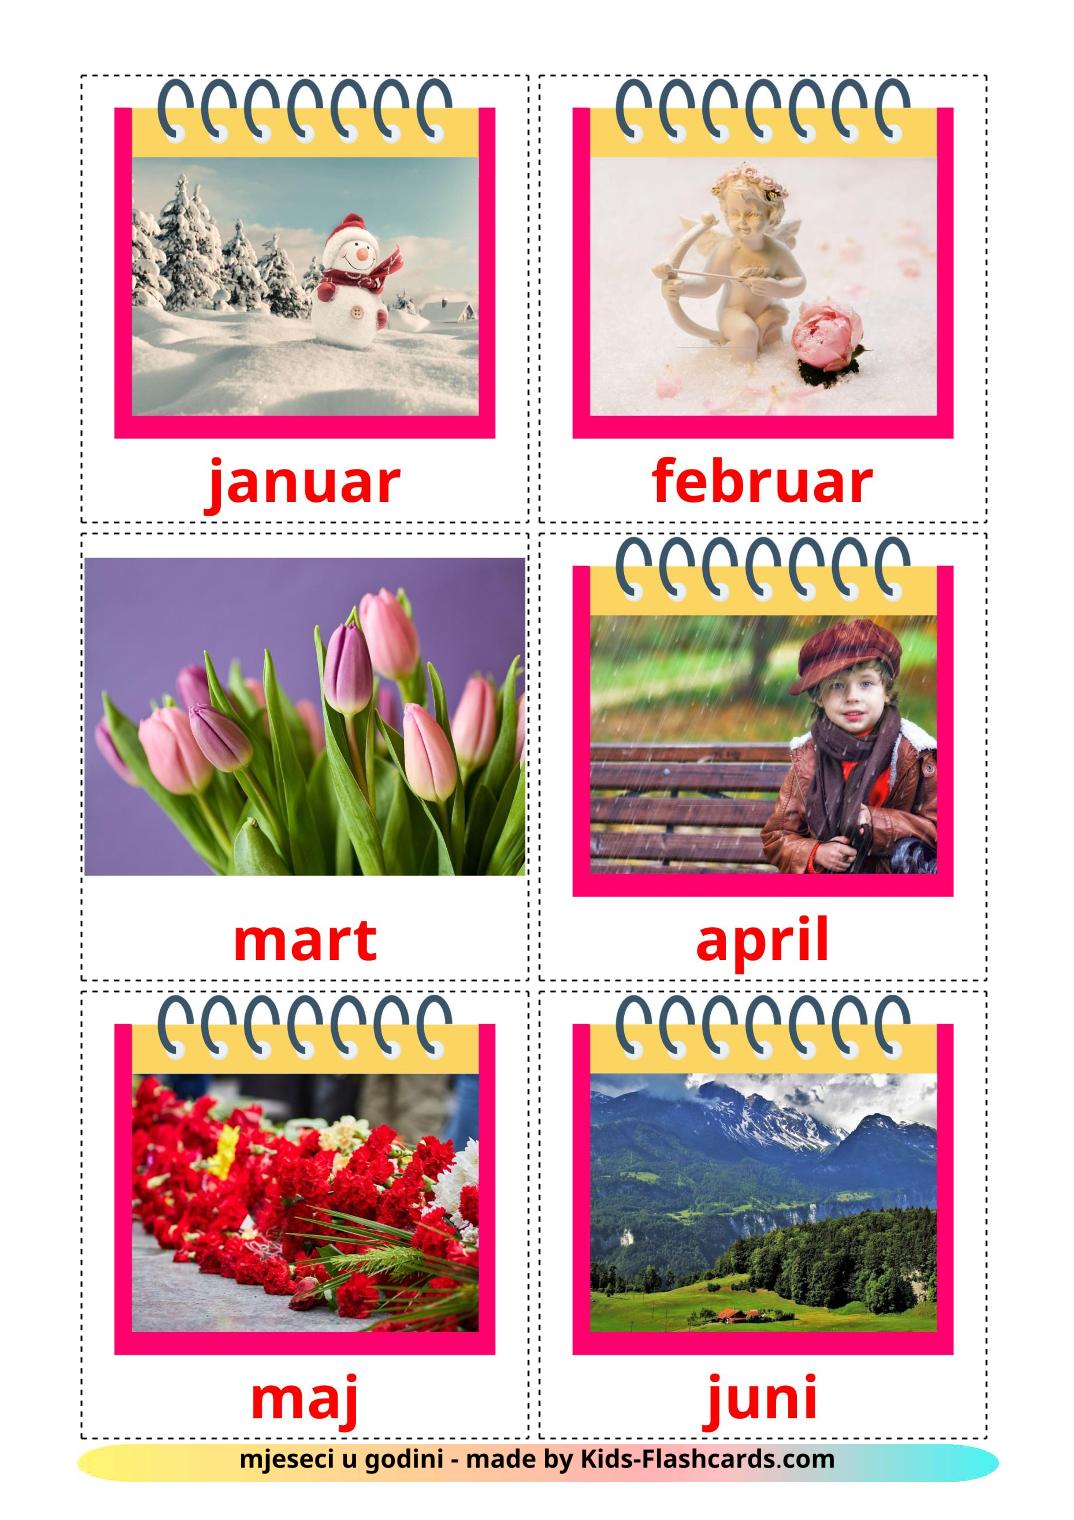 Months of the Year - 12 Free Printable bosnian Flashcards 